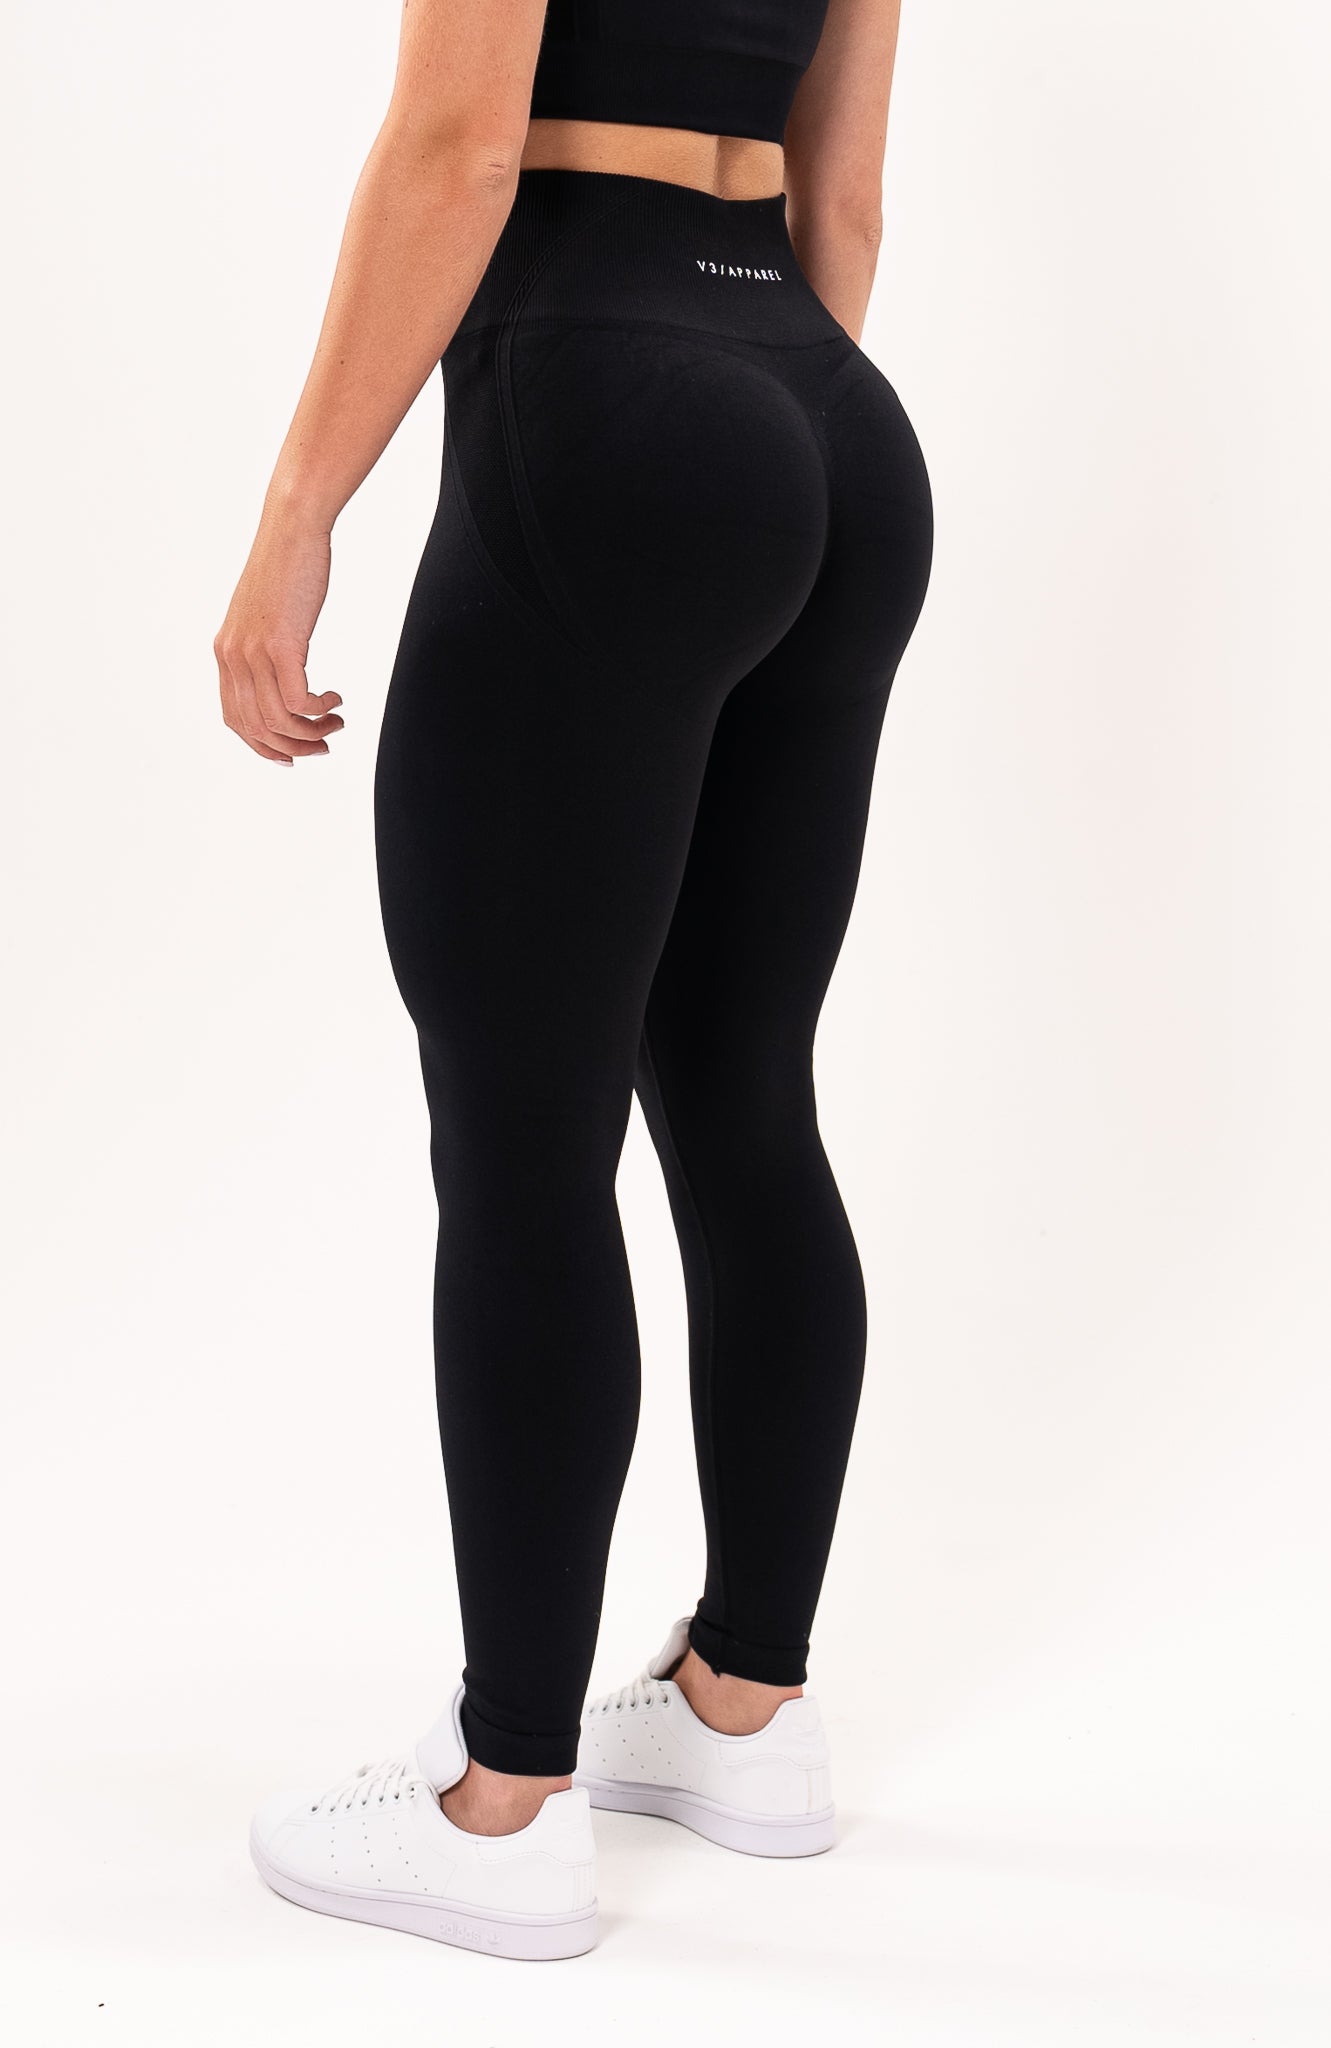 redbaysand Women's Tempo seamless scrunch bum shaping high waisted leggings in black – Squat proof sports tights for Gym workouts training, Running, yoga, bodybuilding and bikini fitness.